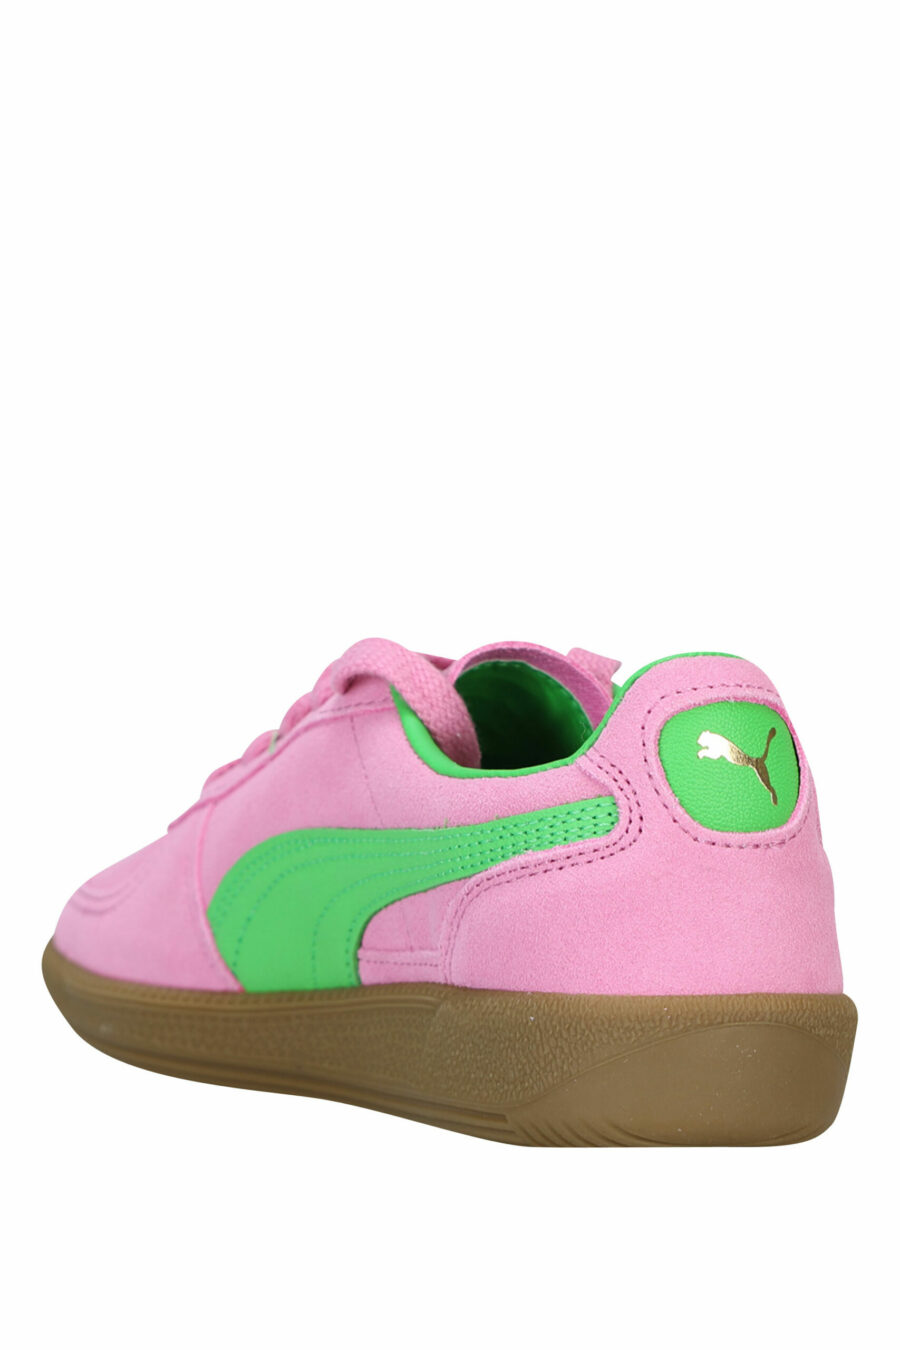 Trainers "palermo" fuchsia with green - 4099685699247 3 scaled